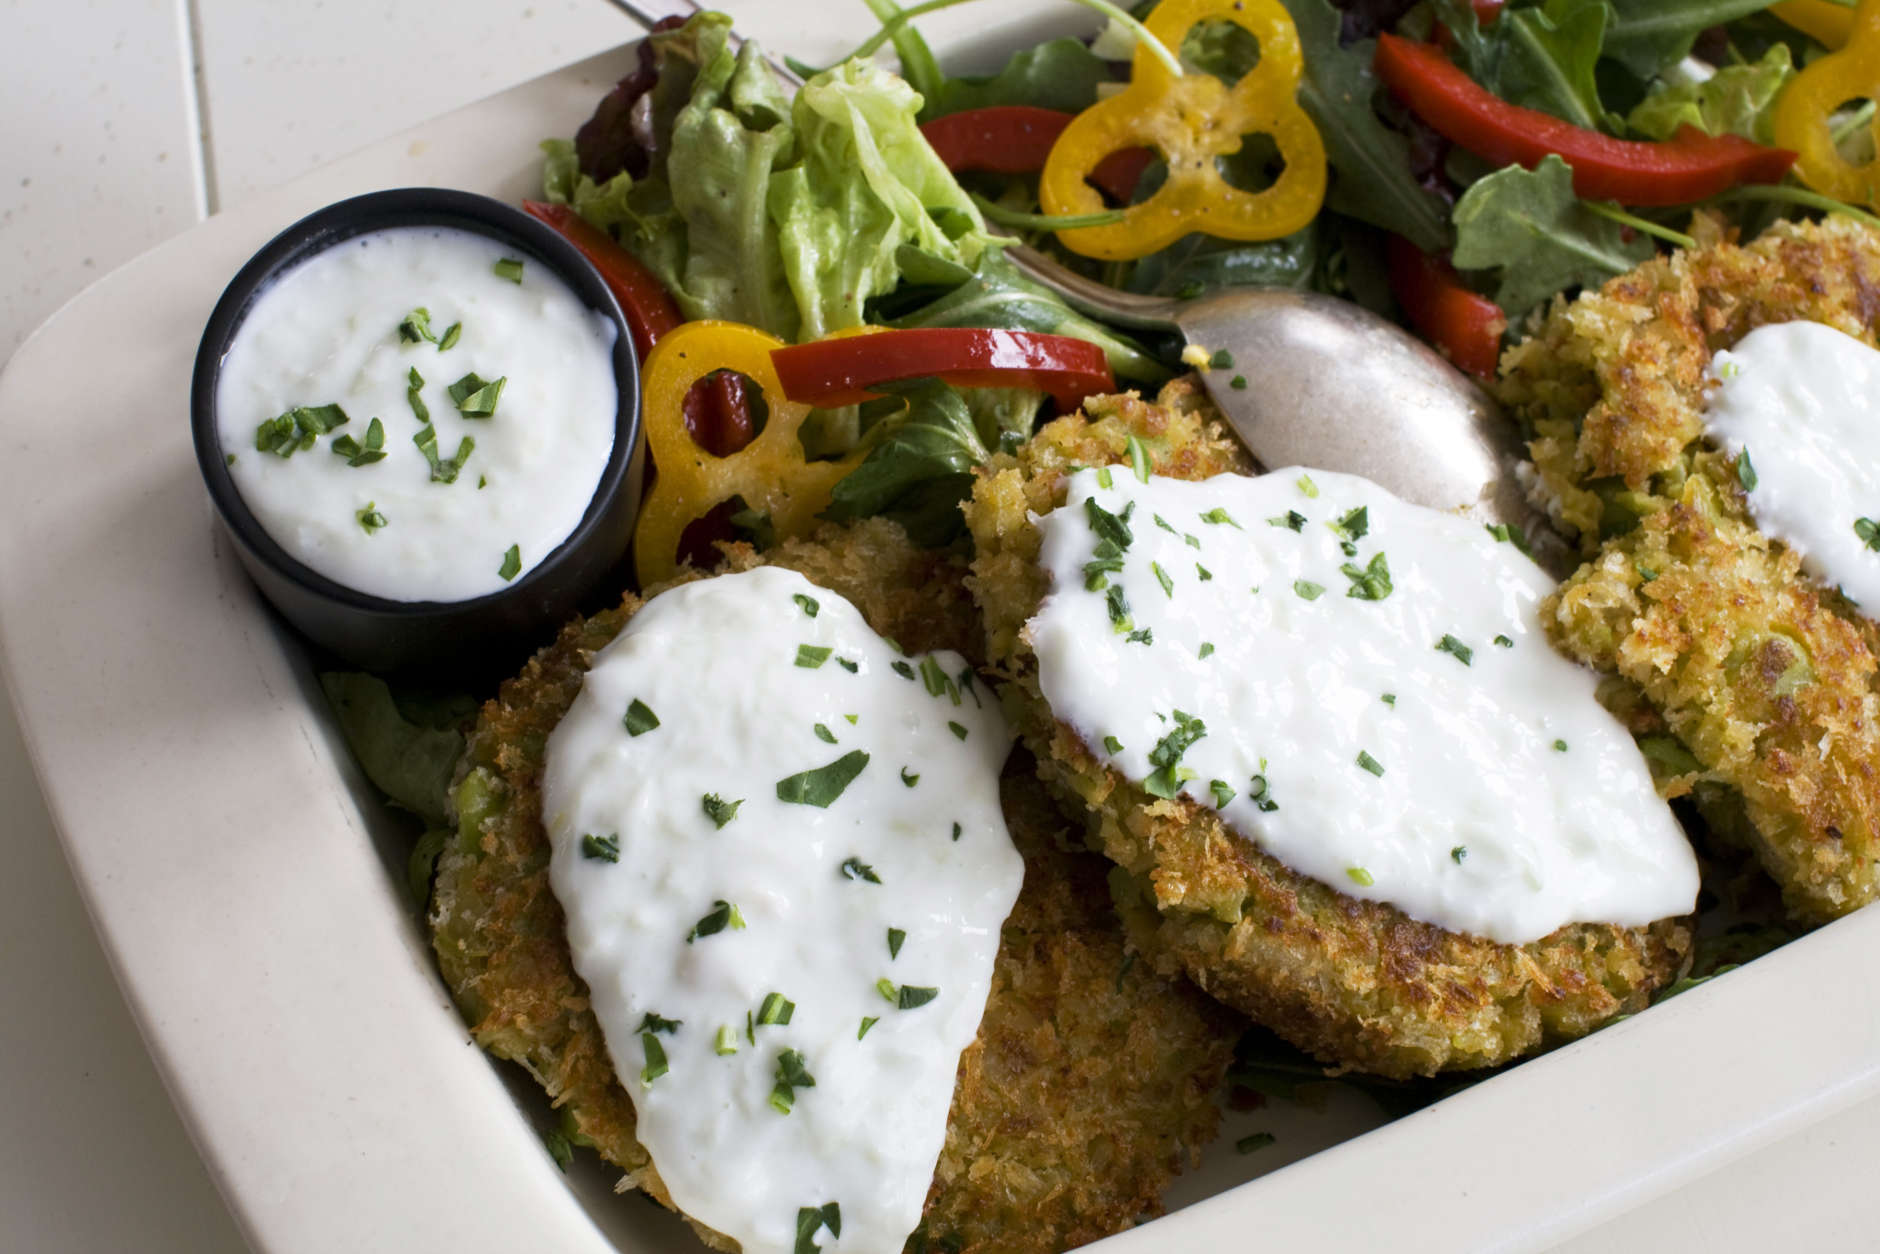 This March 25, 2013 photo taken in Concord, N.H., shows a recipe for Fava Bean Falafel Burger topped with a cucumber yogurt sauce. Falafel are deep-fried fritters made from ground chickpeas or fava beans. (AP Photo/Matthew Mead)